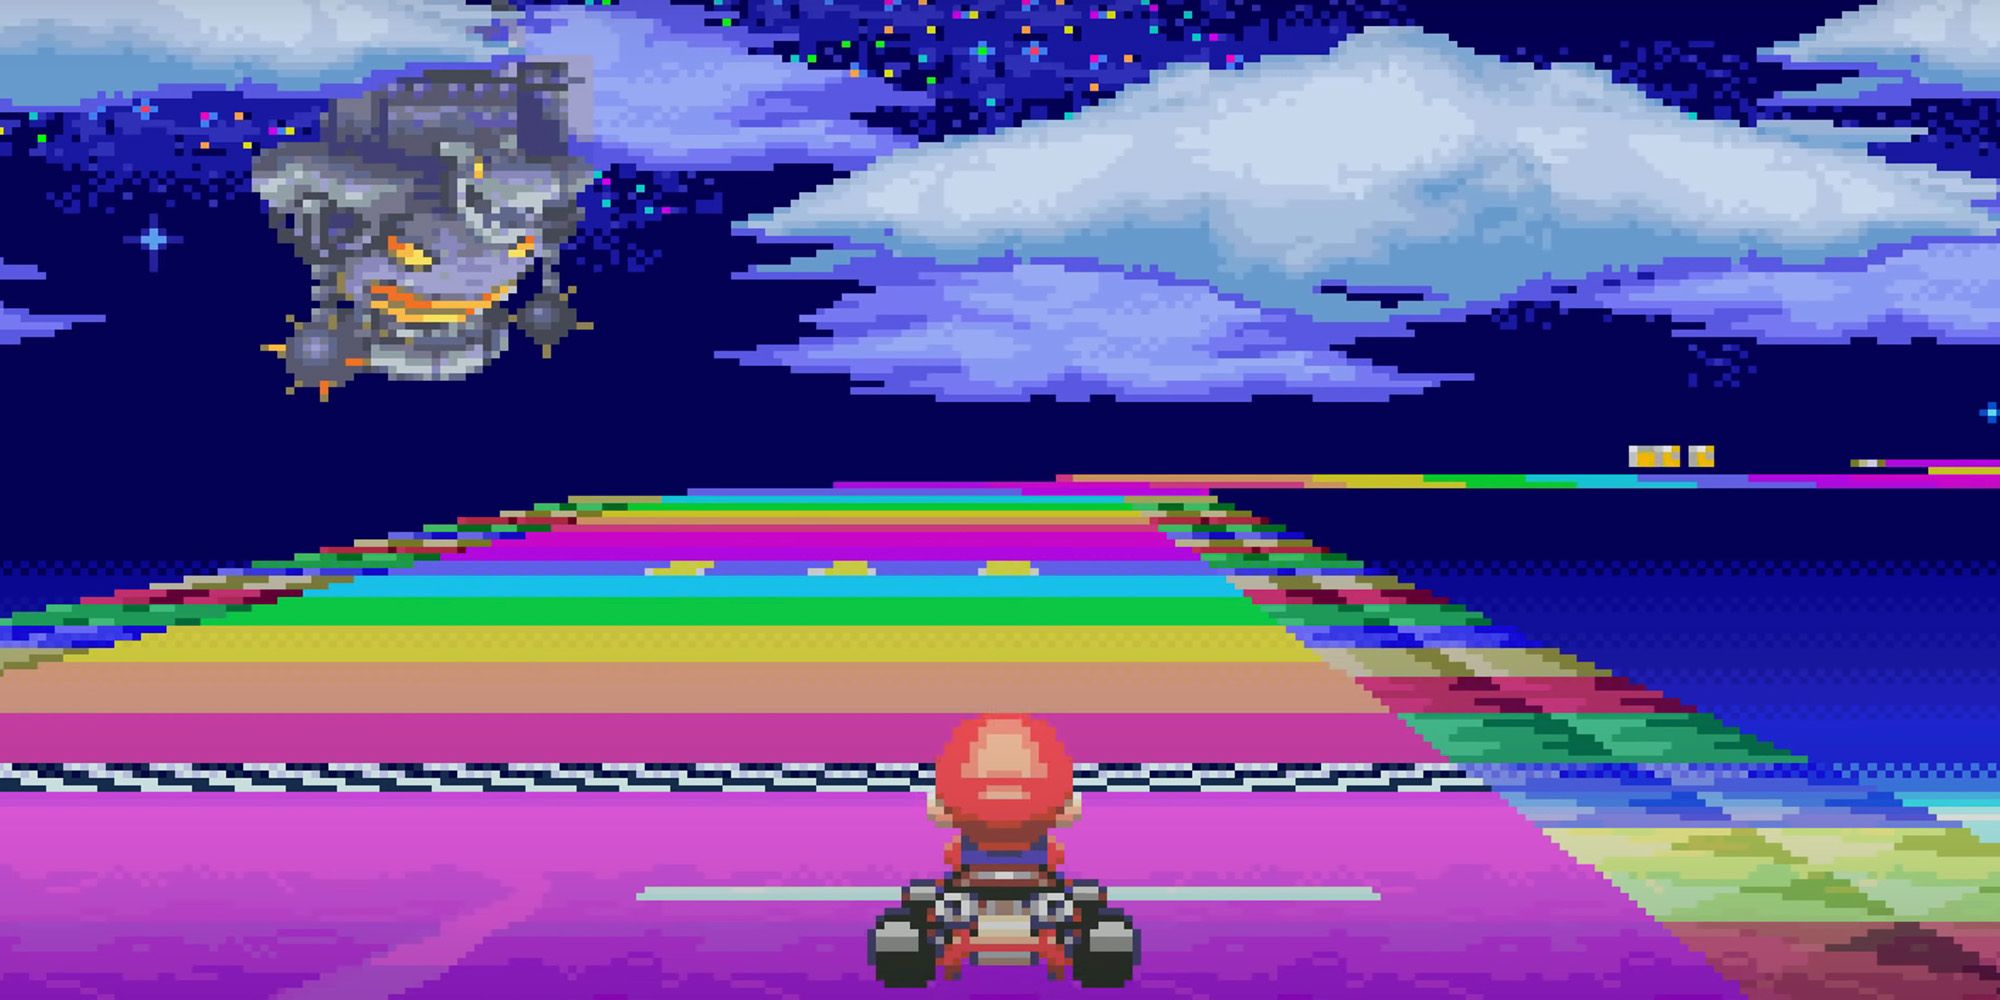 Mario Kart Super Circuit - Mario racing down rainbow road while Bowser's Castle lingers in the background